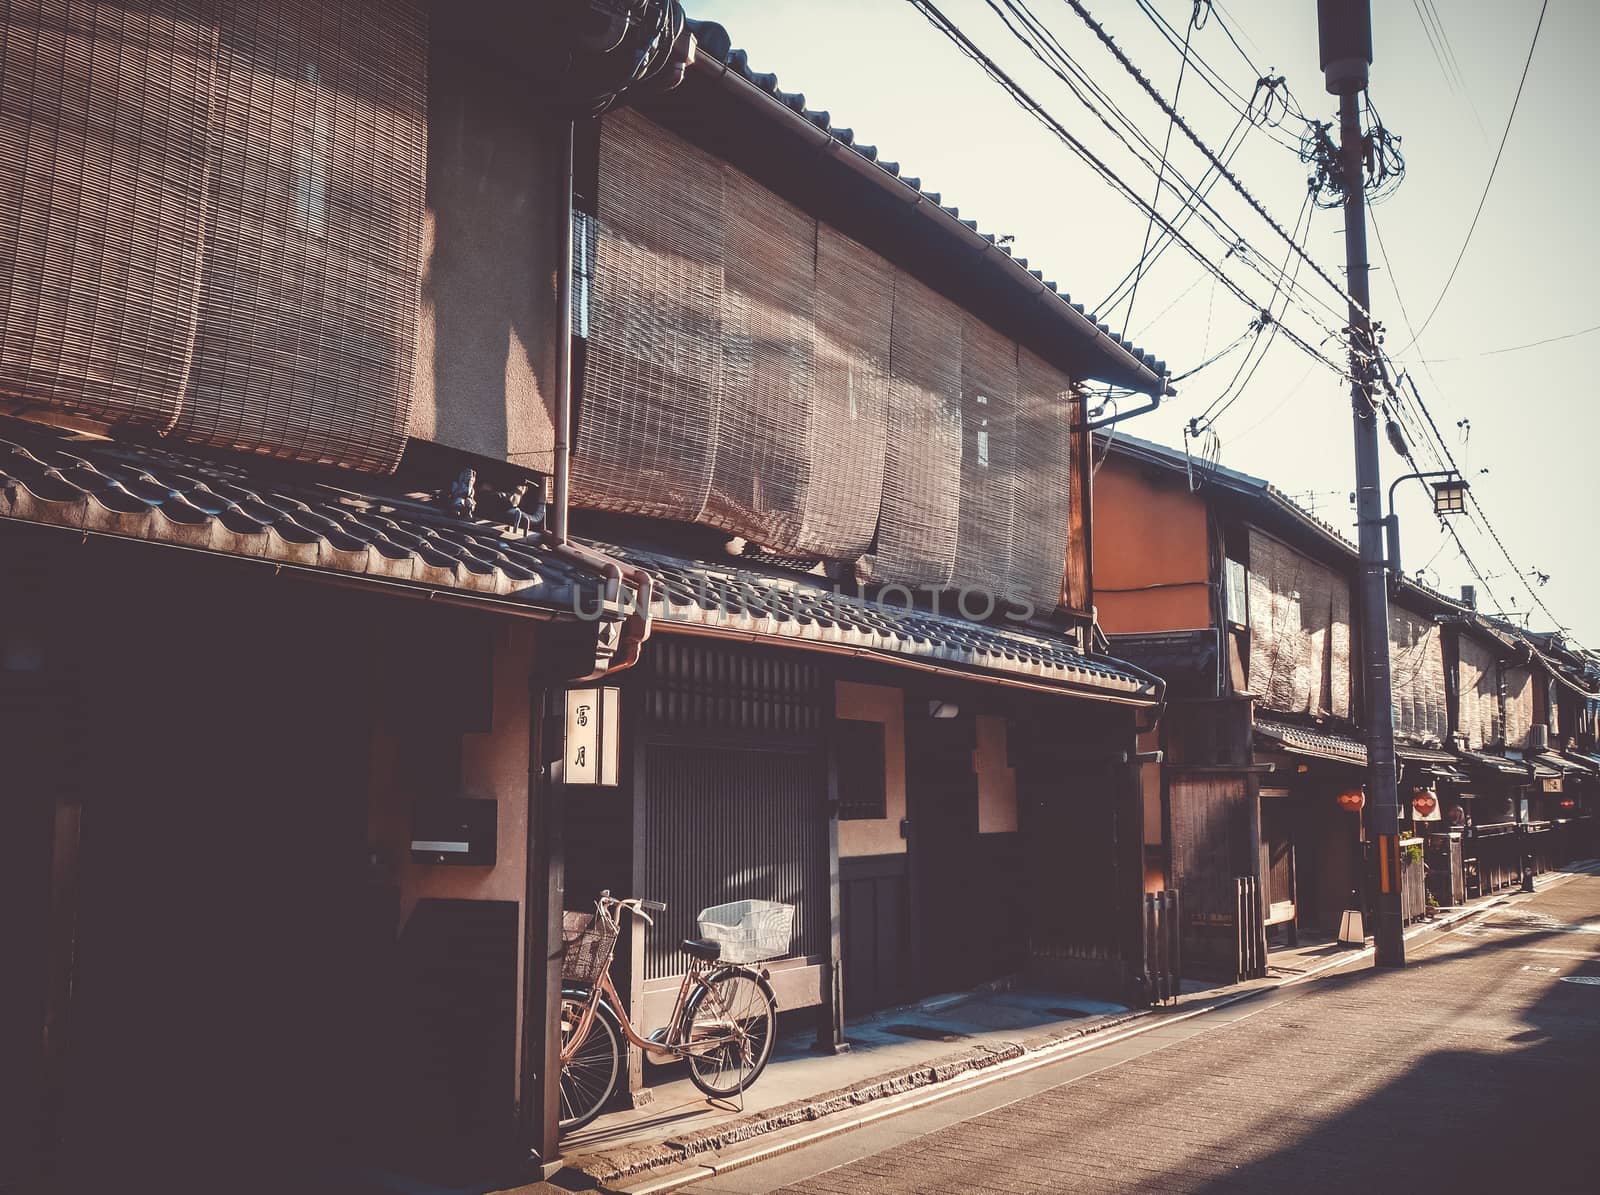 Traditional japanese houses, Gion district, Kyoto, Japan by daboost